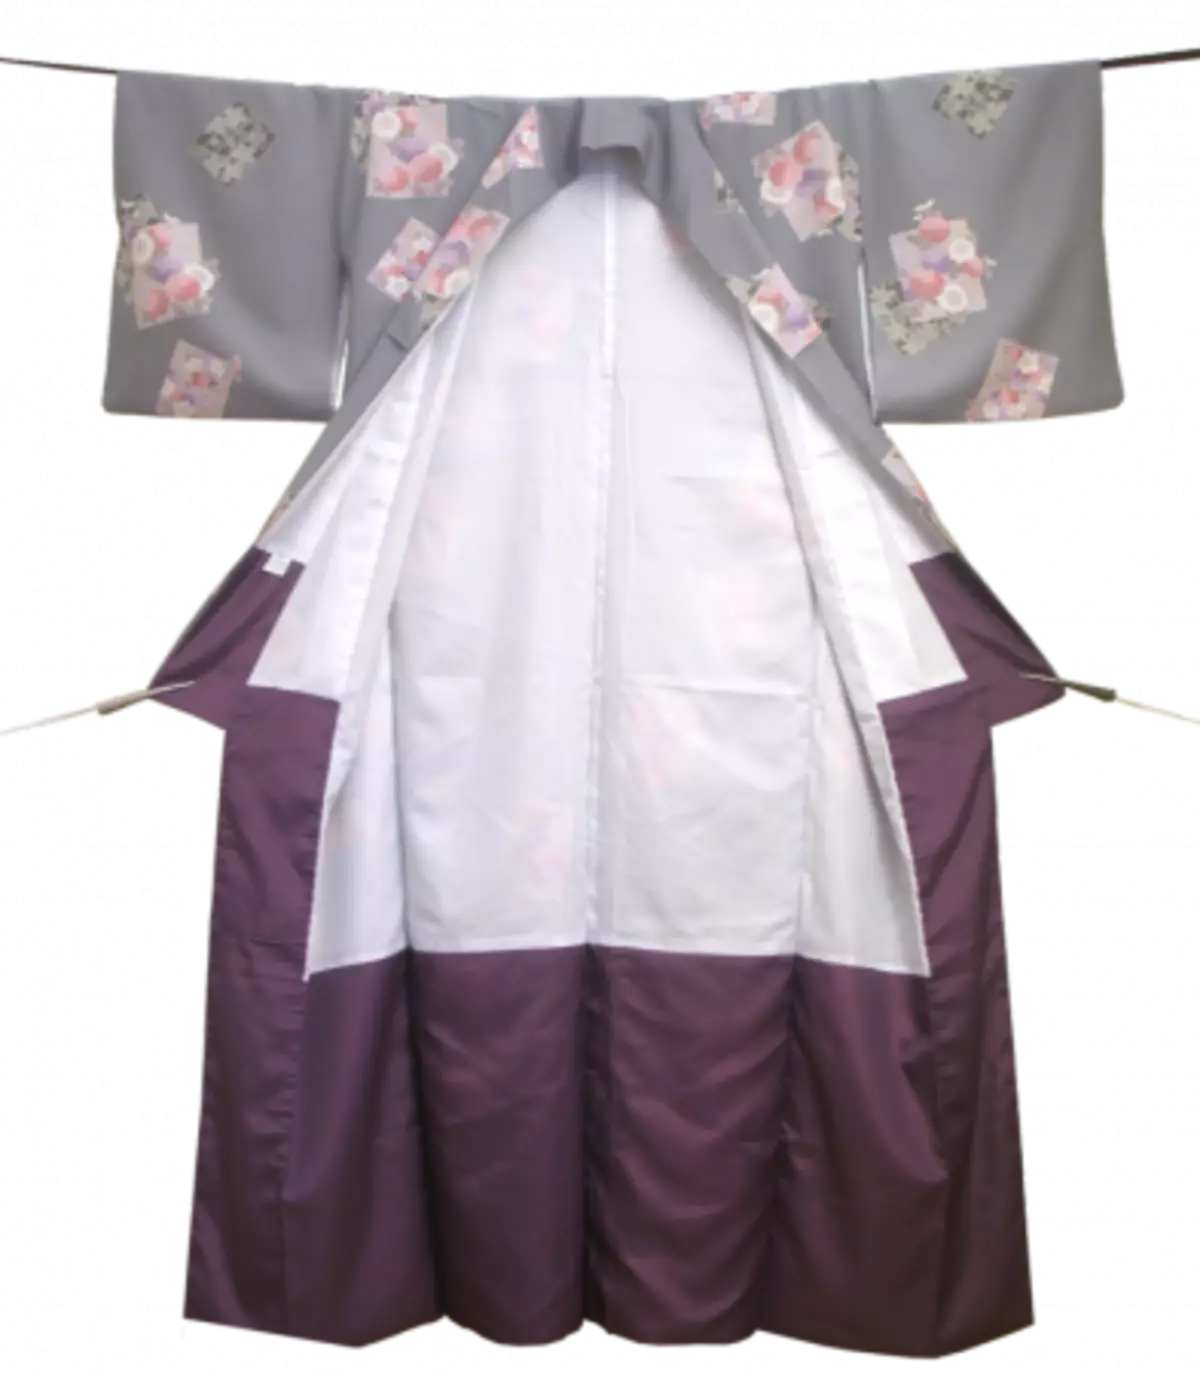 How to sew a Japanese robe - Kimono do it yourself: Pattern and History Creating Dresses